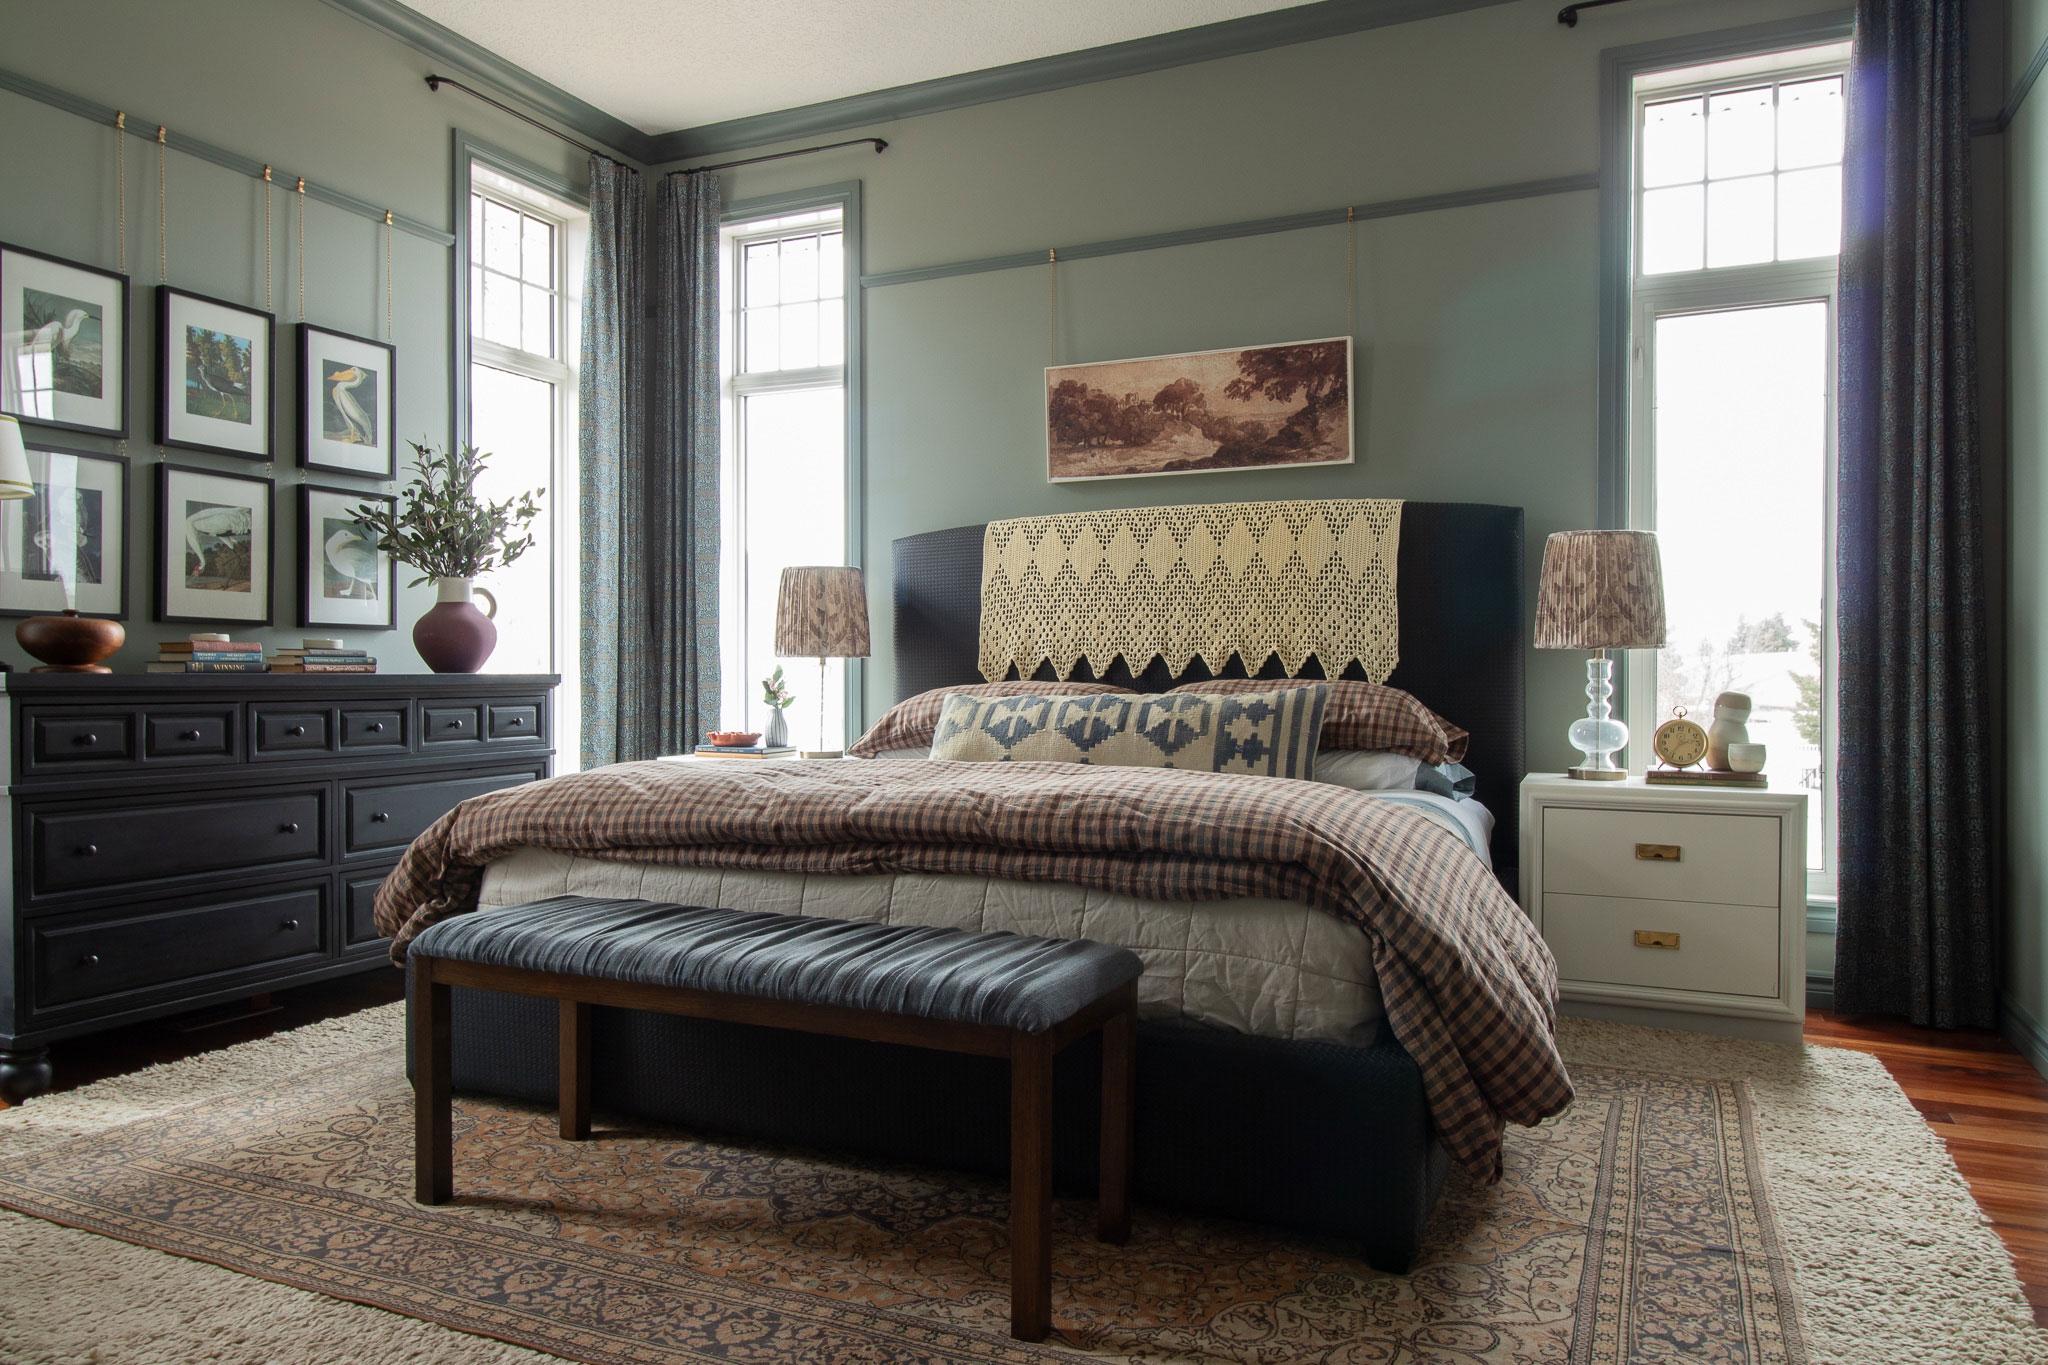 Bedroom with pale green walls and darker green trim, picture rail, beige and brown checkered bedding, black bed, bench at the end of the bed with two layered wool rugs.  White nightstands.